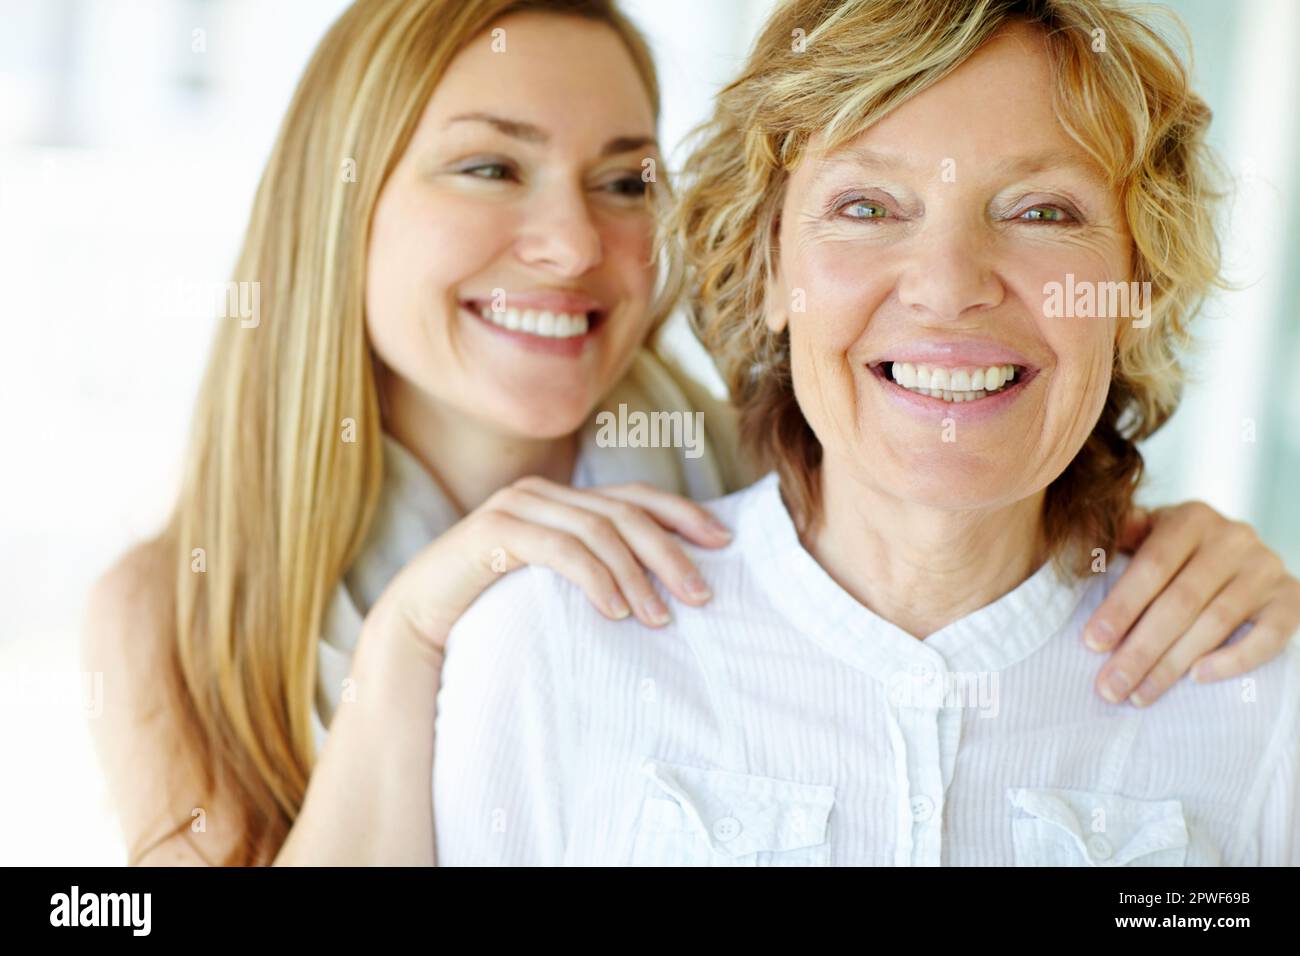 Affectionate rub of the shoulders. A beautiful mature woman giving her mother an affectionate shoulder rub. Stock Photo